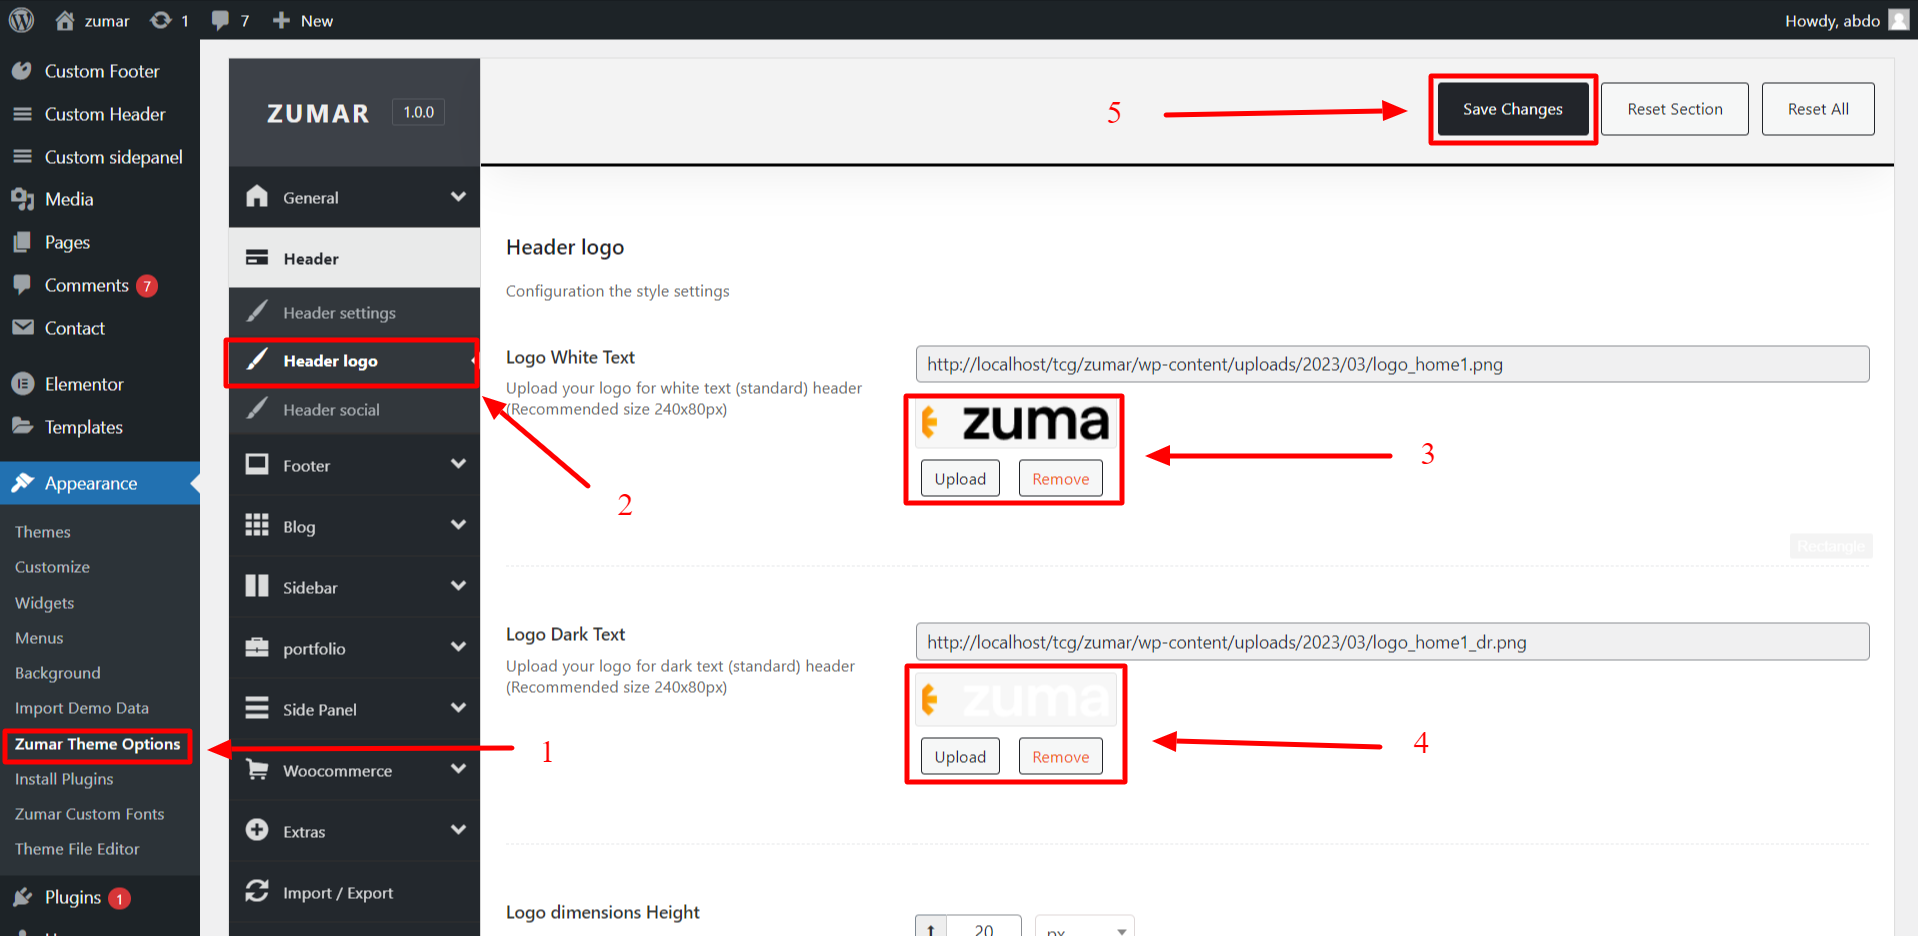 Go to Dashboard > Zumar Theme Options > General > upload your logo from here.